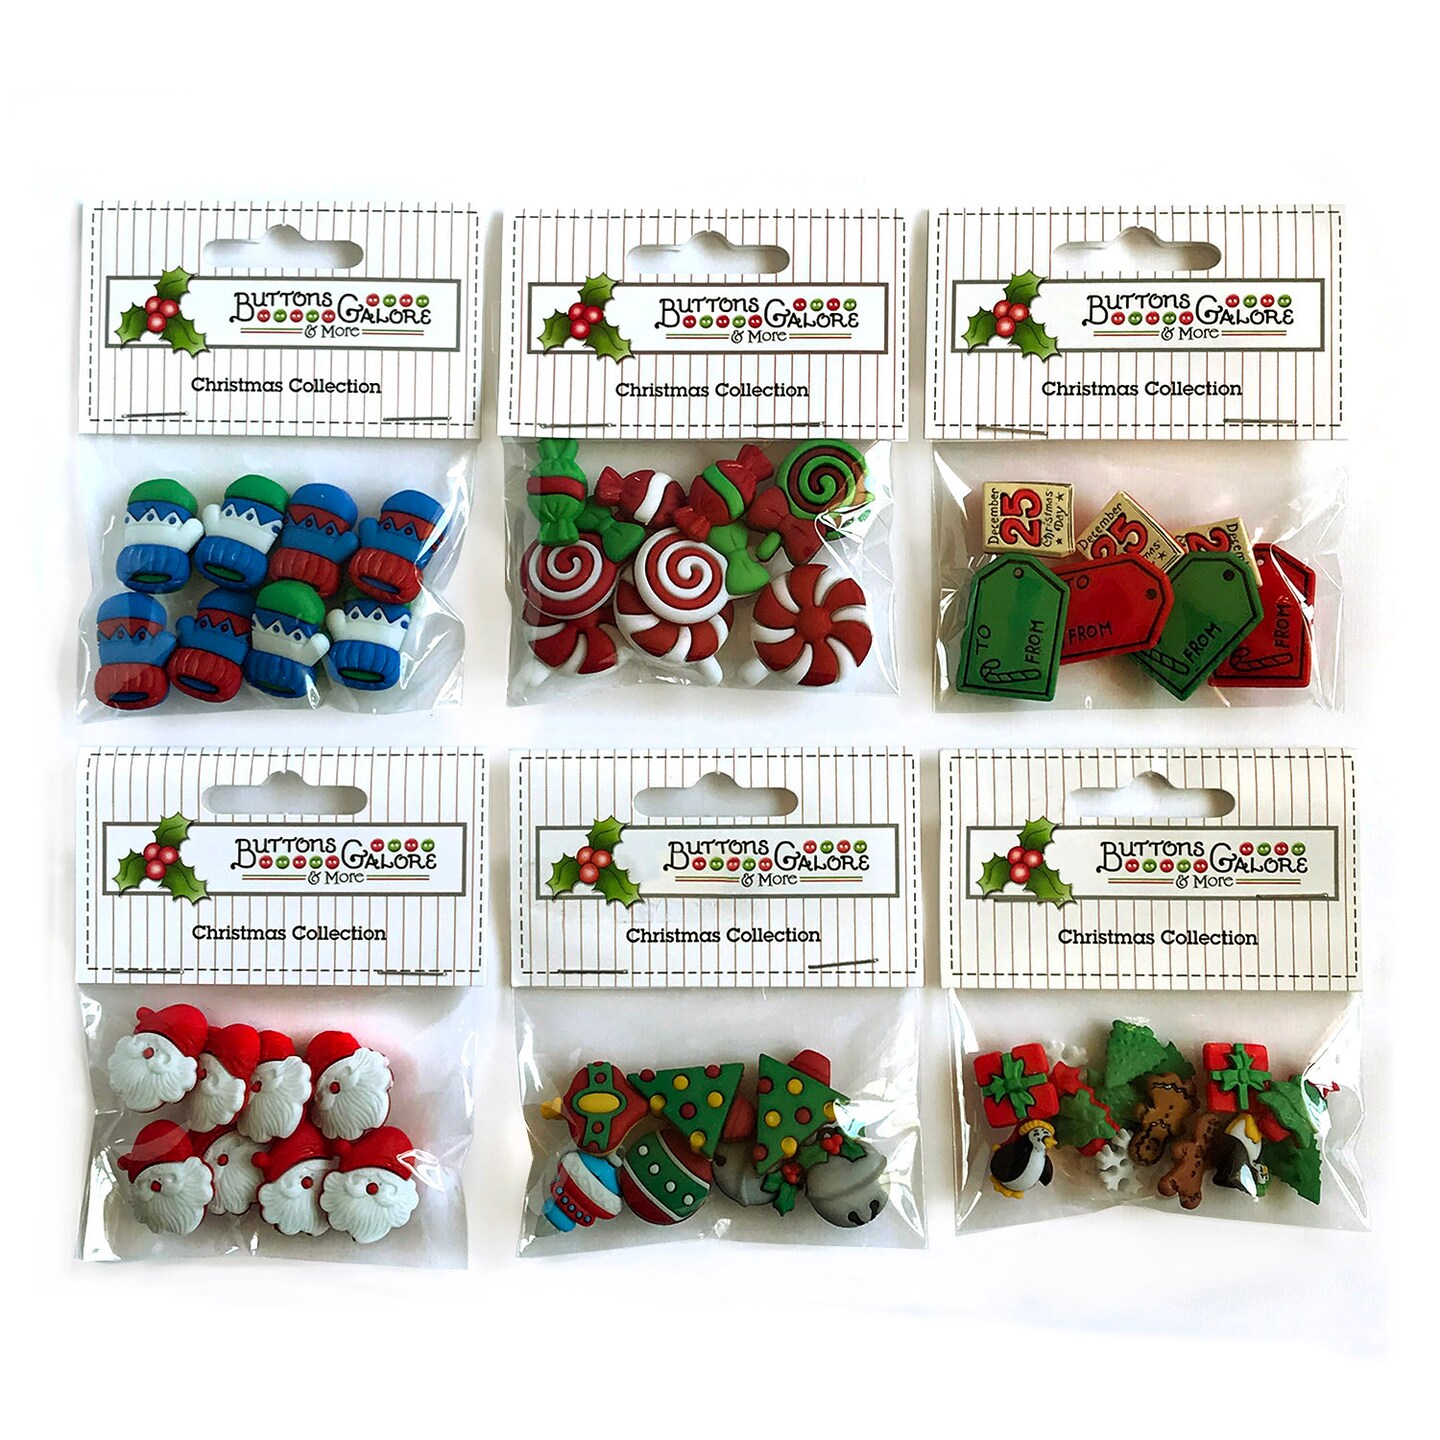 Buttons Galore 50+ Assorted Christmas Buttons for Sewing &#x26; Crafts - Set of 6 Button Packs